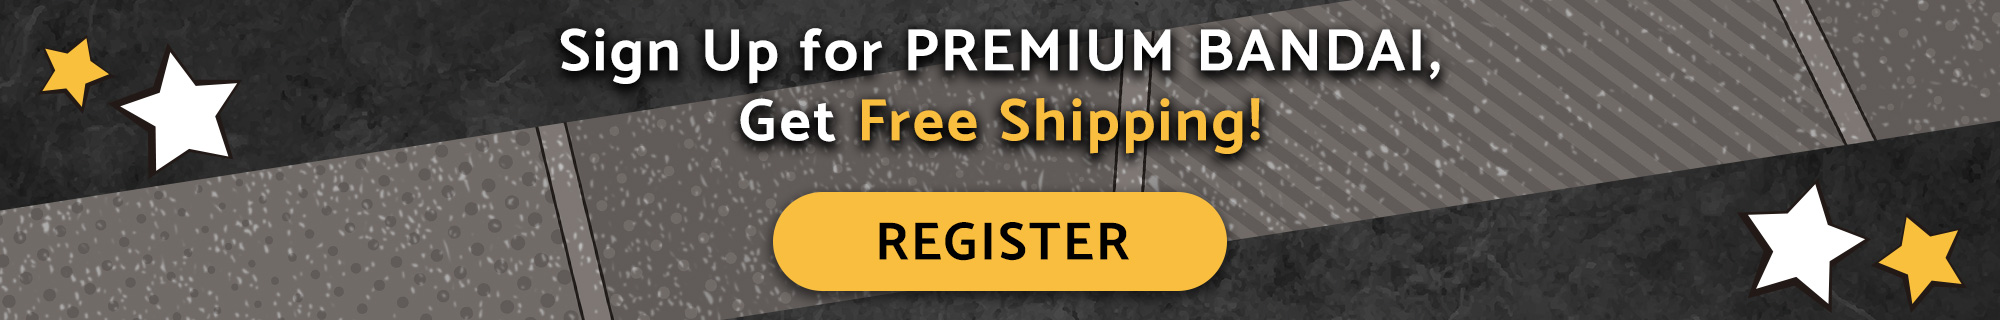 Sign up for PREMIUM BANDAI, get free shipping!